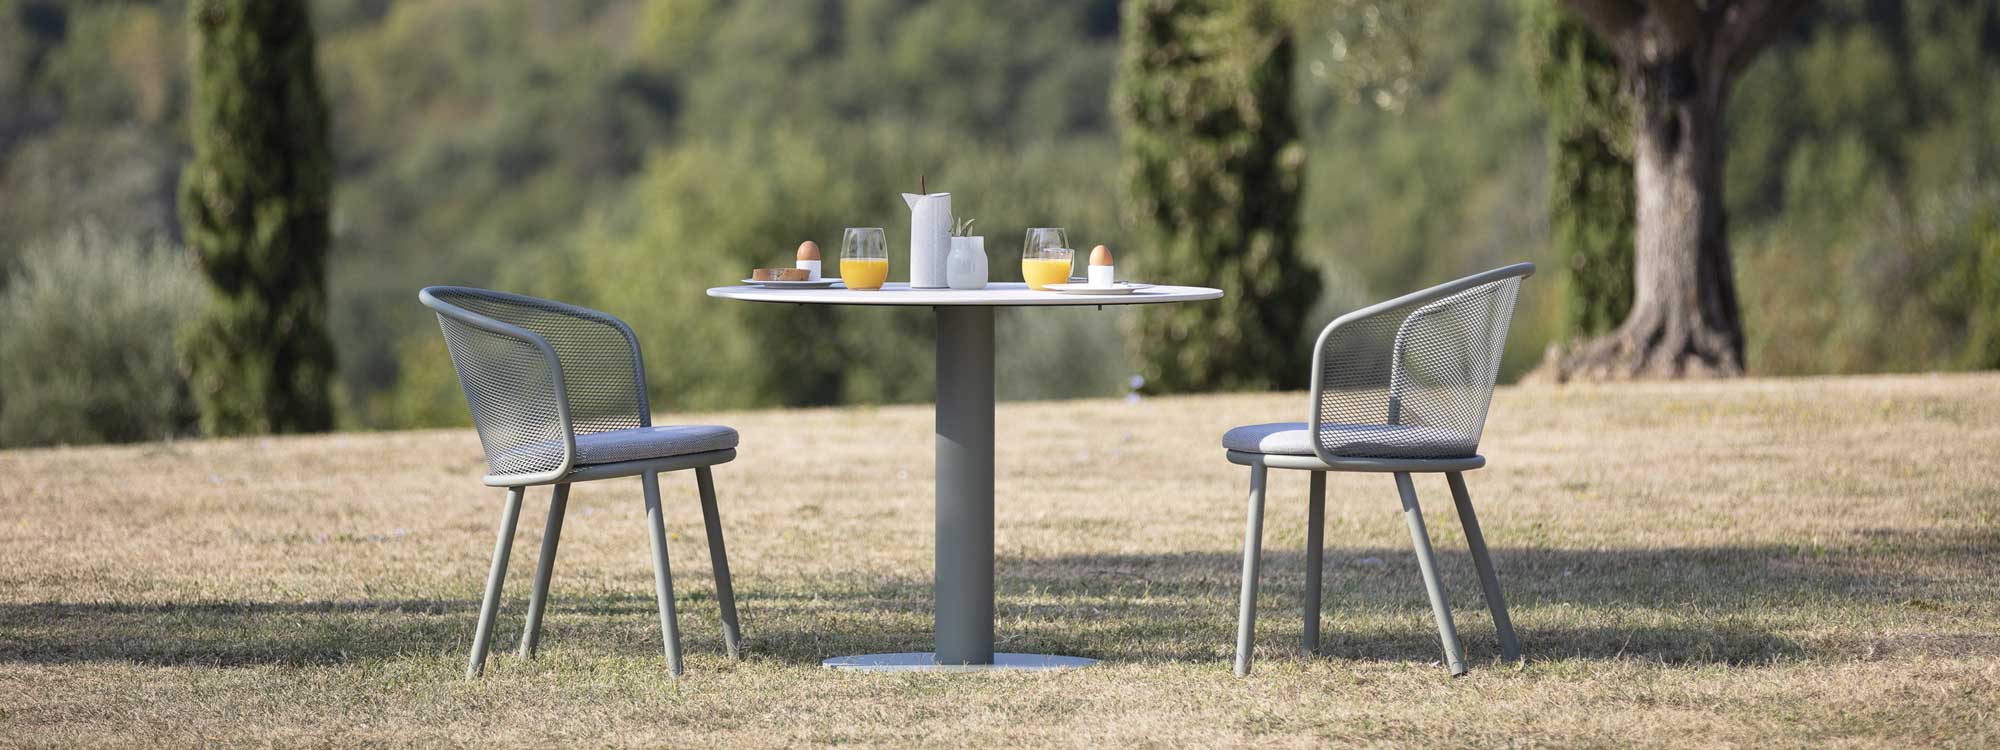 Baza outdoor chair is a modern garden dining chair in high quality outdoor furniture materials by Todus designer exterior furniture company